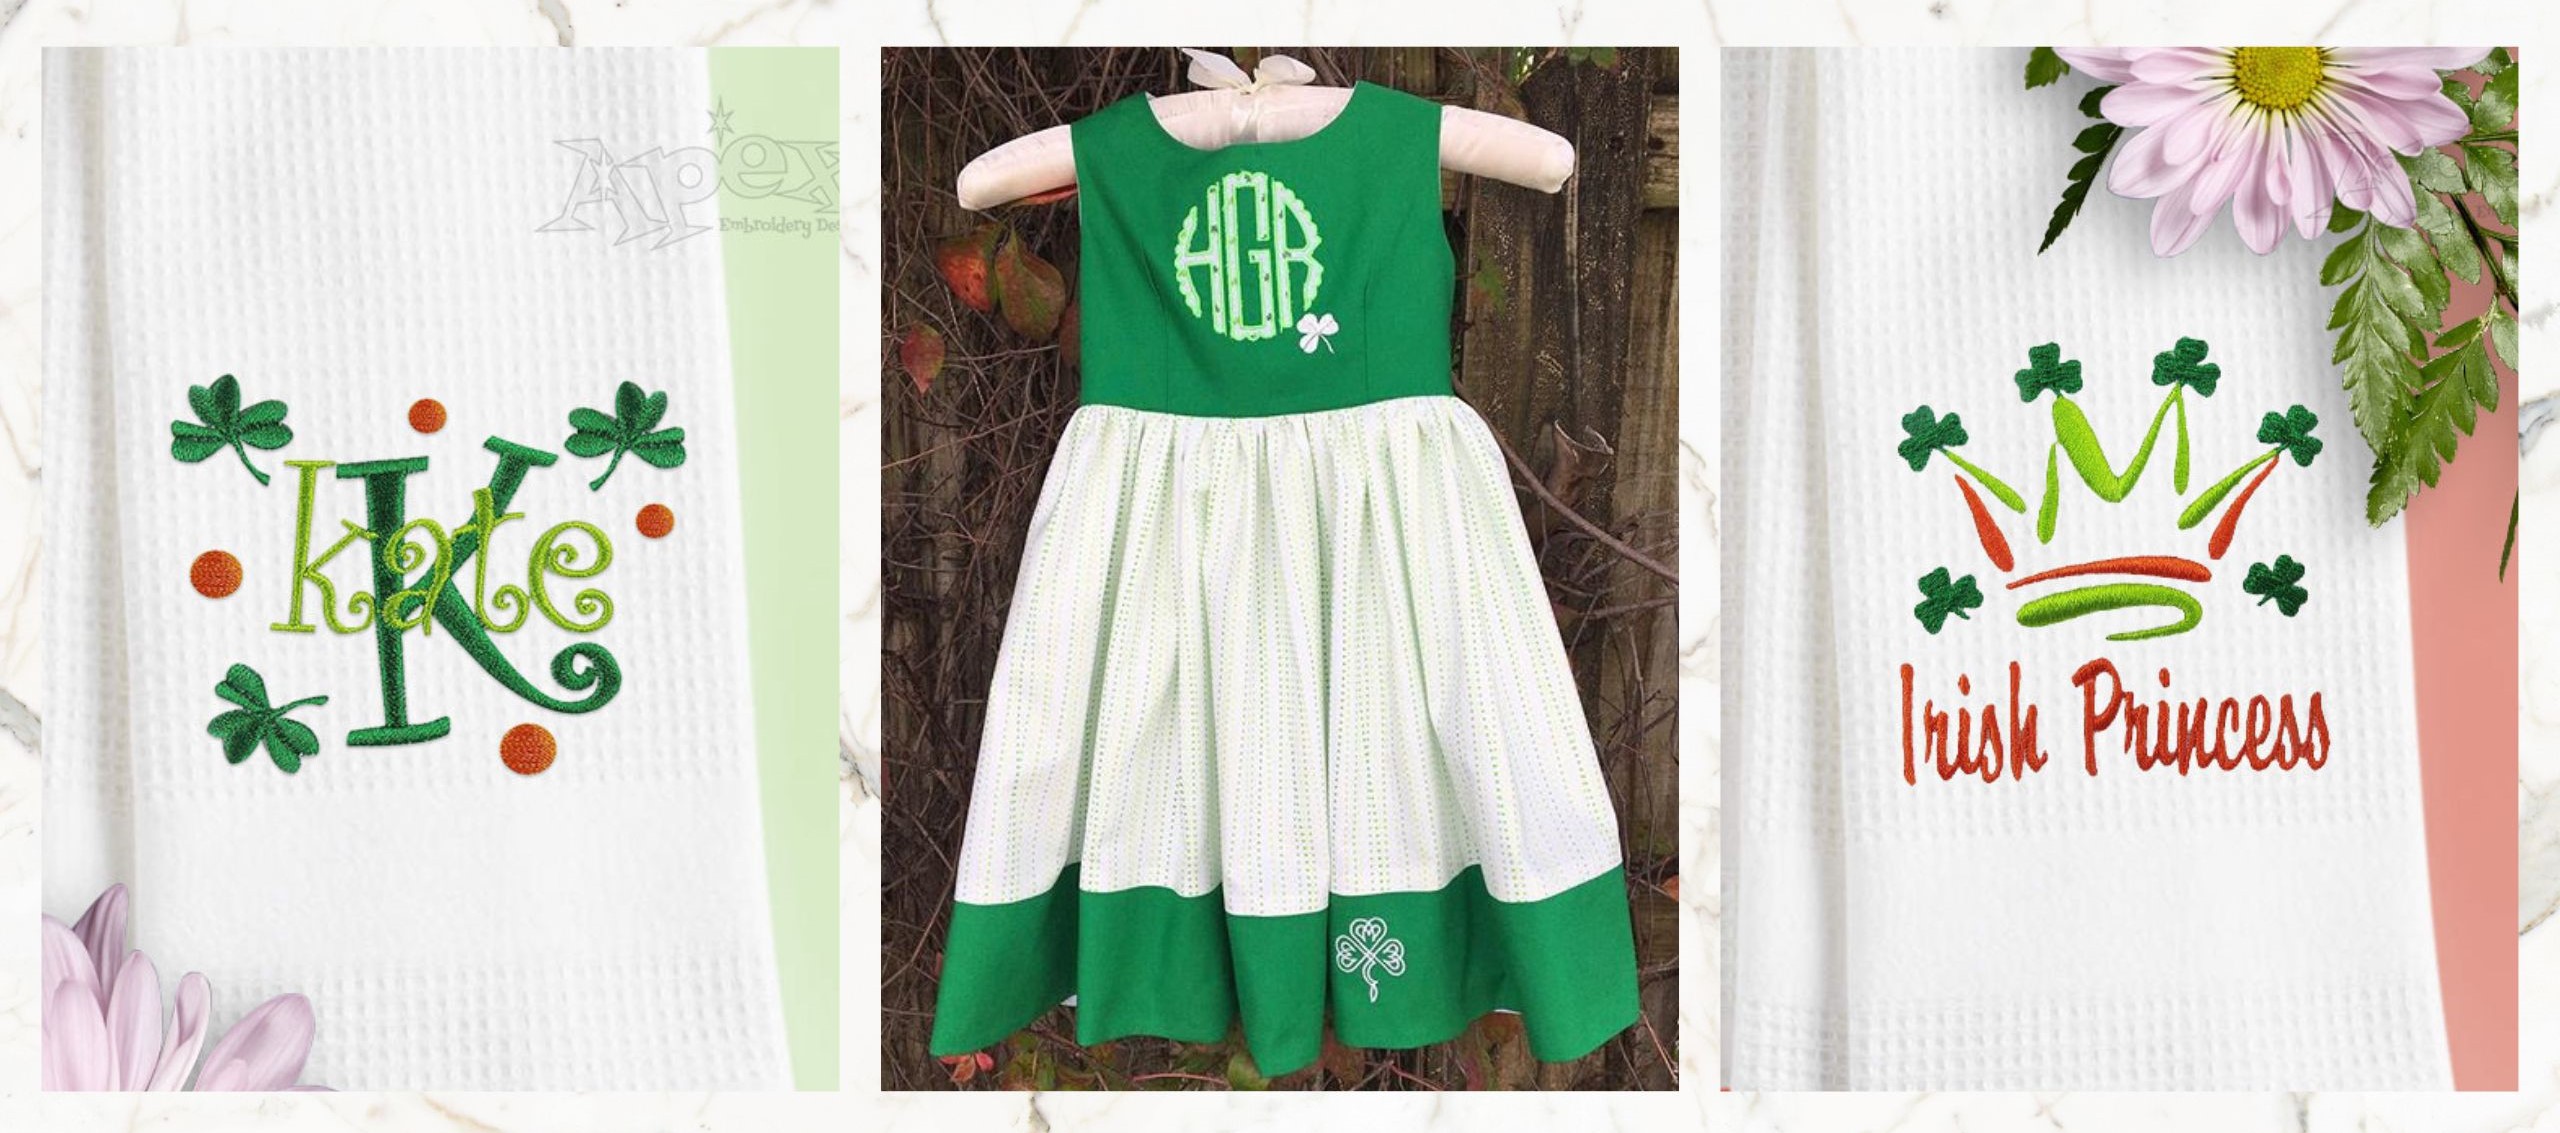 St. Patrick's Day Embroidery Designs